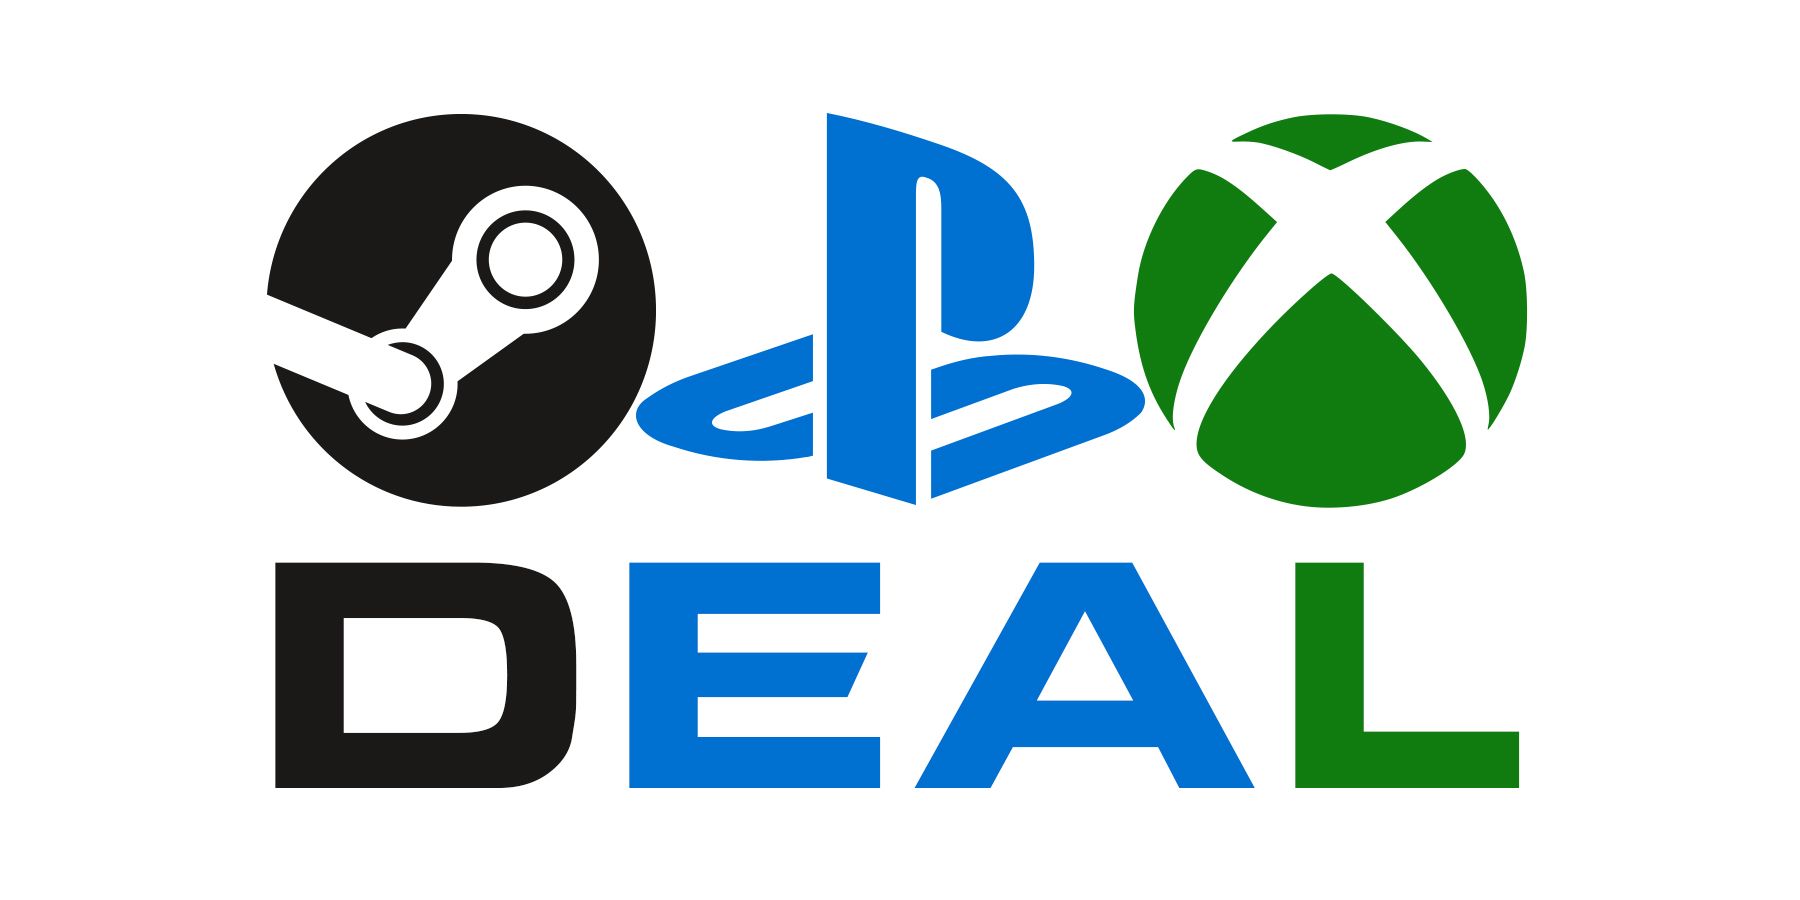 Steam PlayStation Xbox logo submarks deal tagline on white background